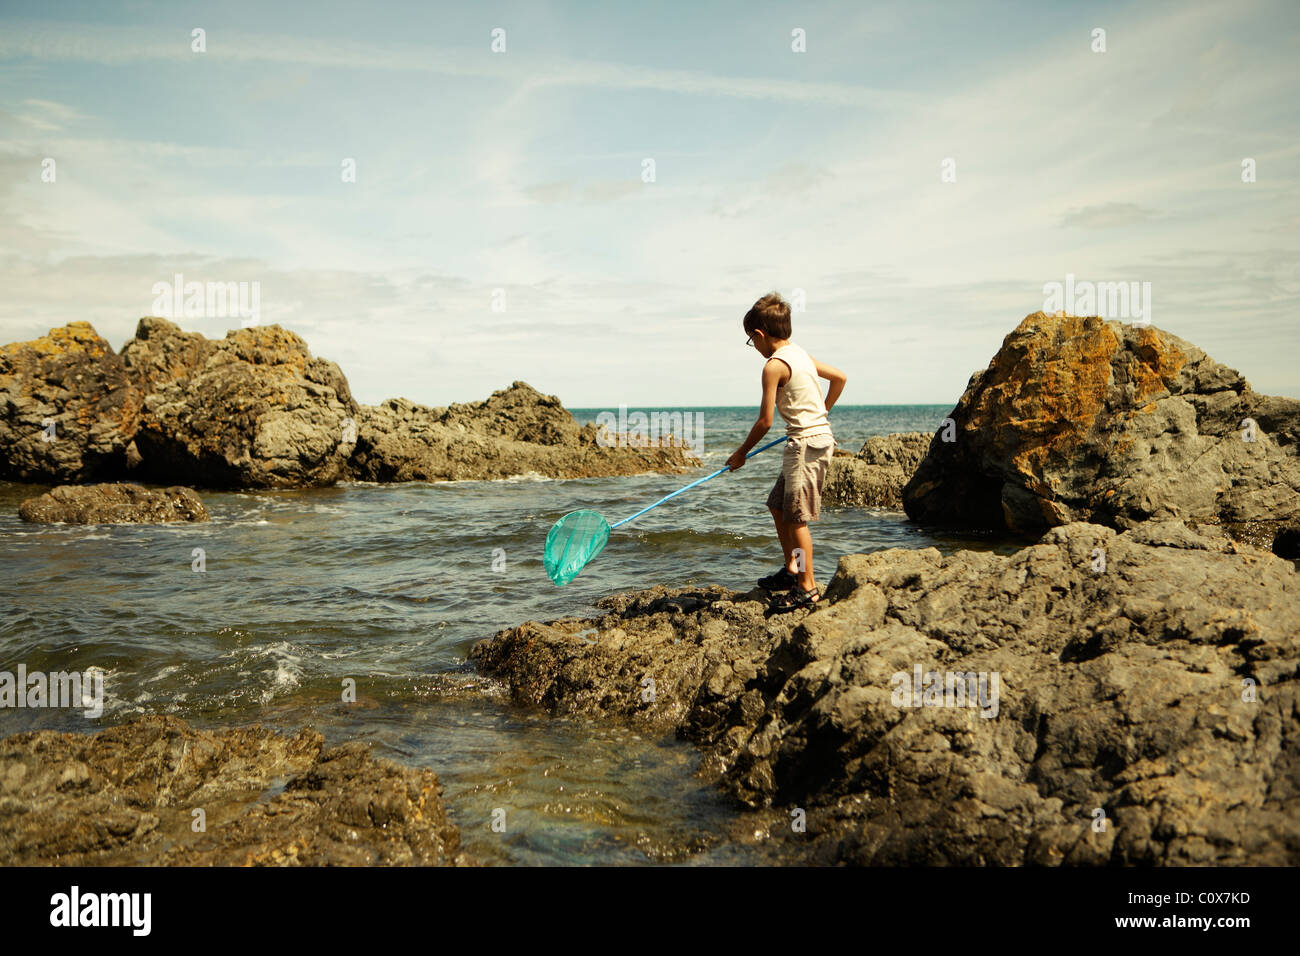 Boy with blue fishing net by the ocean, New Zealand Stock Photo